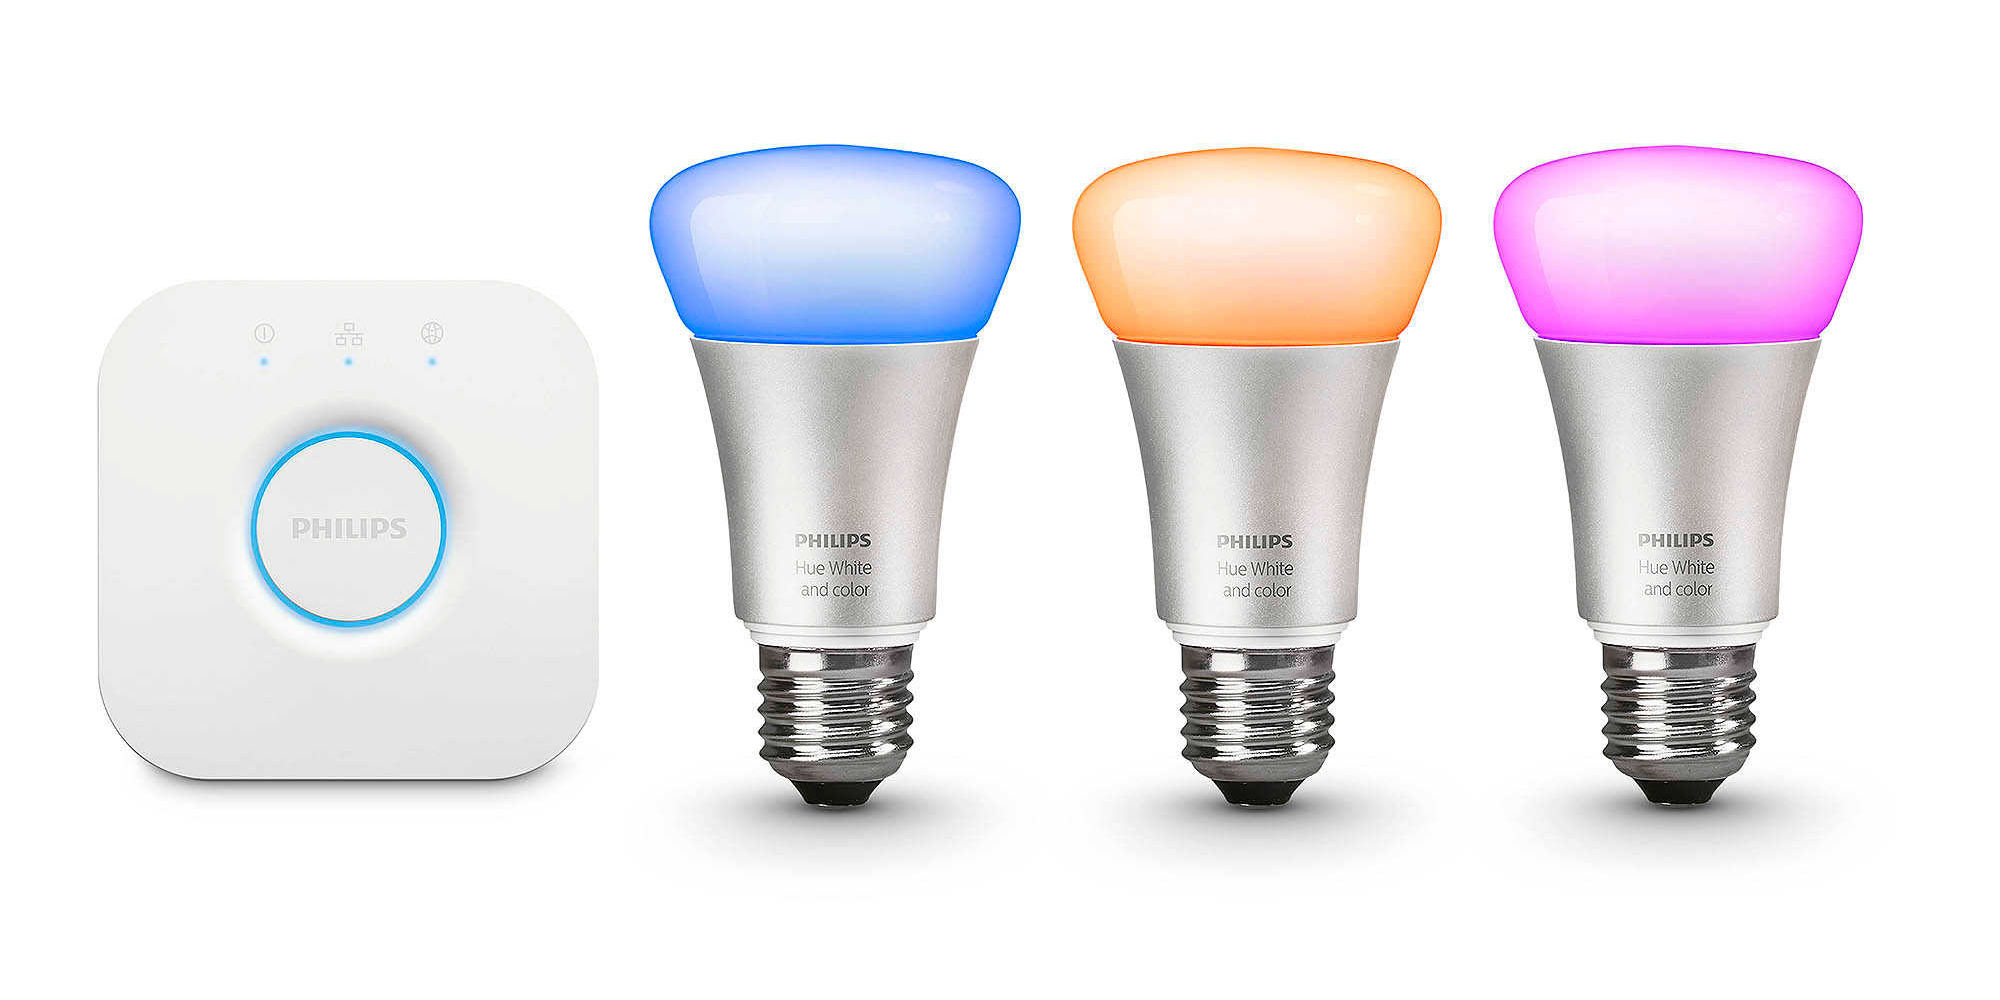 Philips Hue Color Ambiance 2nd Gen. Starter kit to $88 Prime shipped (Refurb, Orig. $200)